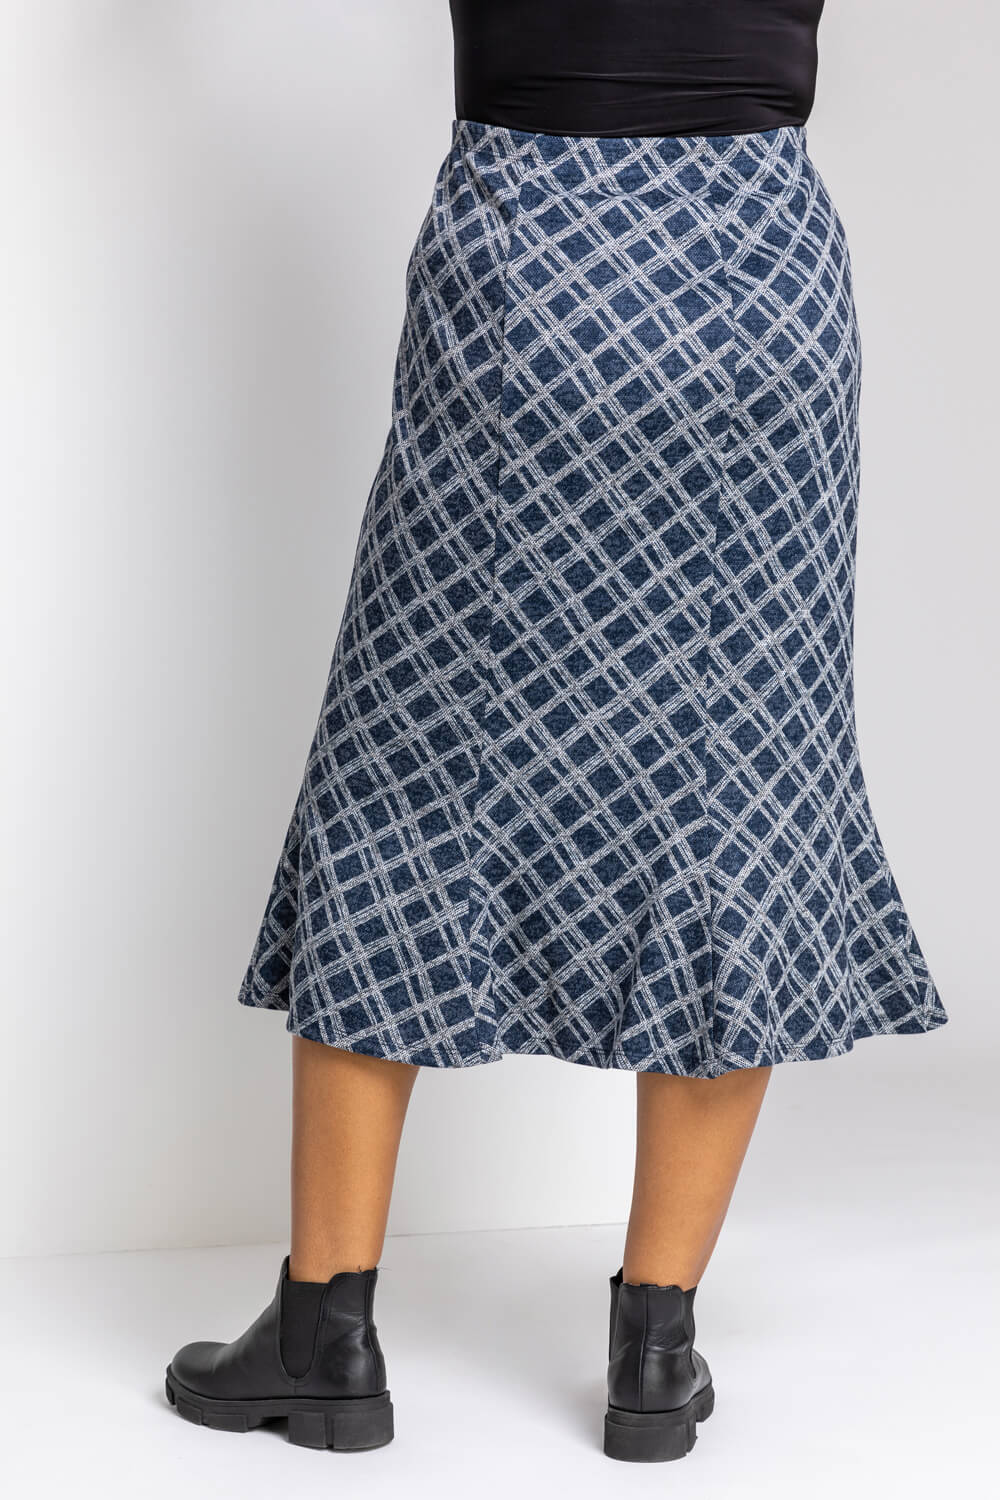 Curve Check Print Fluted Skirt in Navy - Roman Originals UK